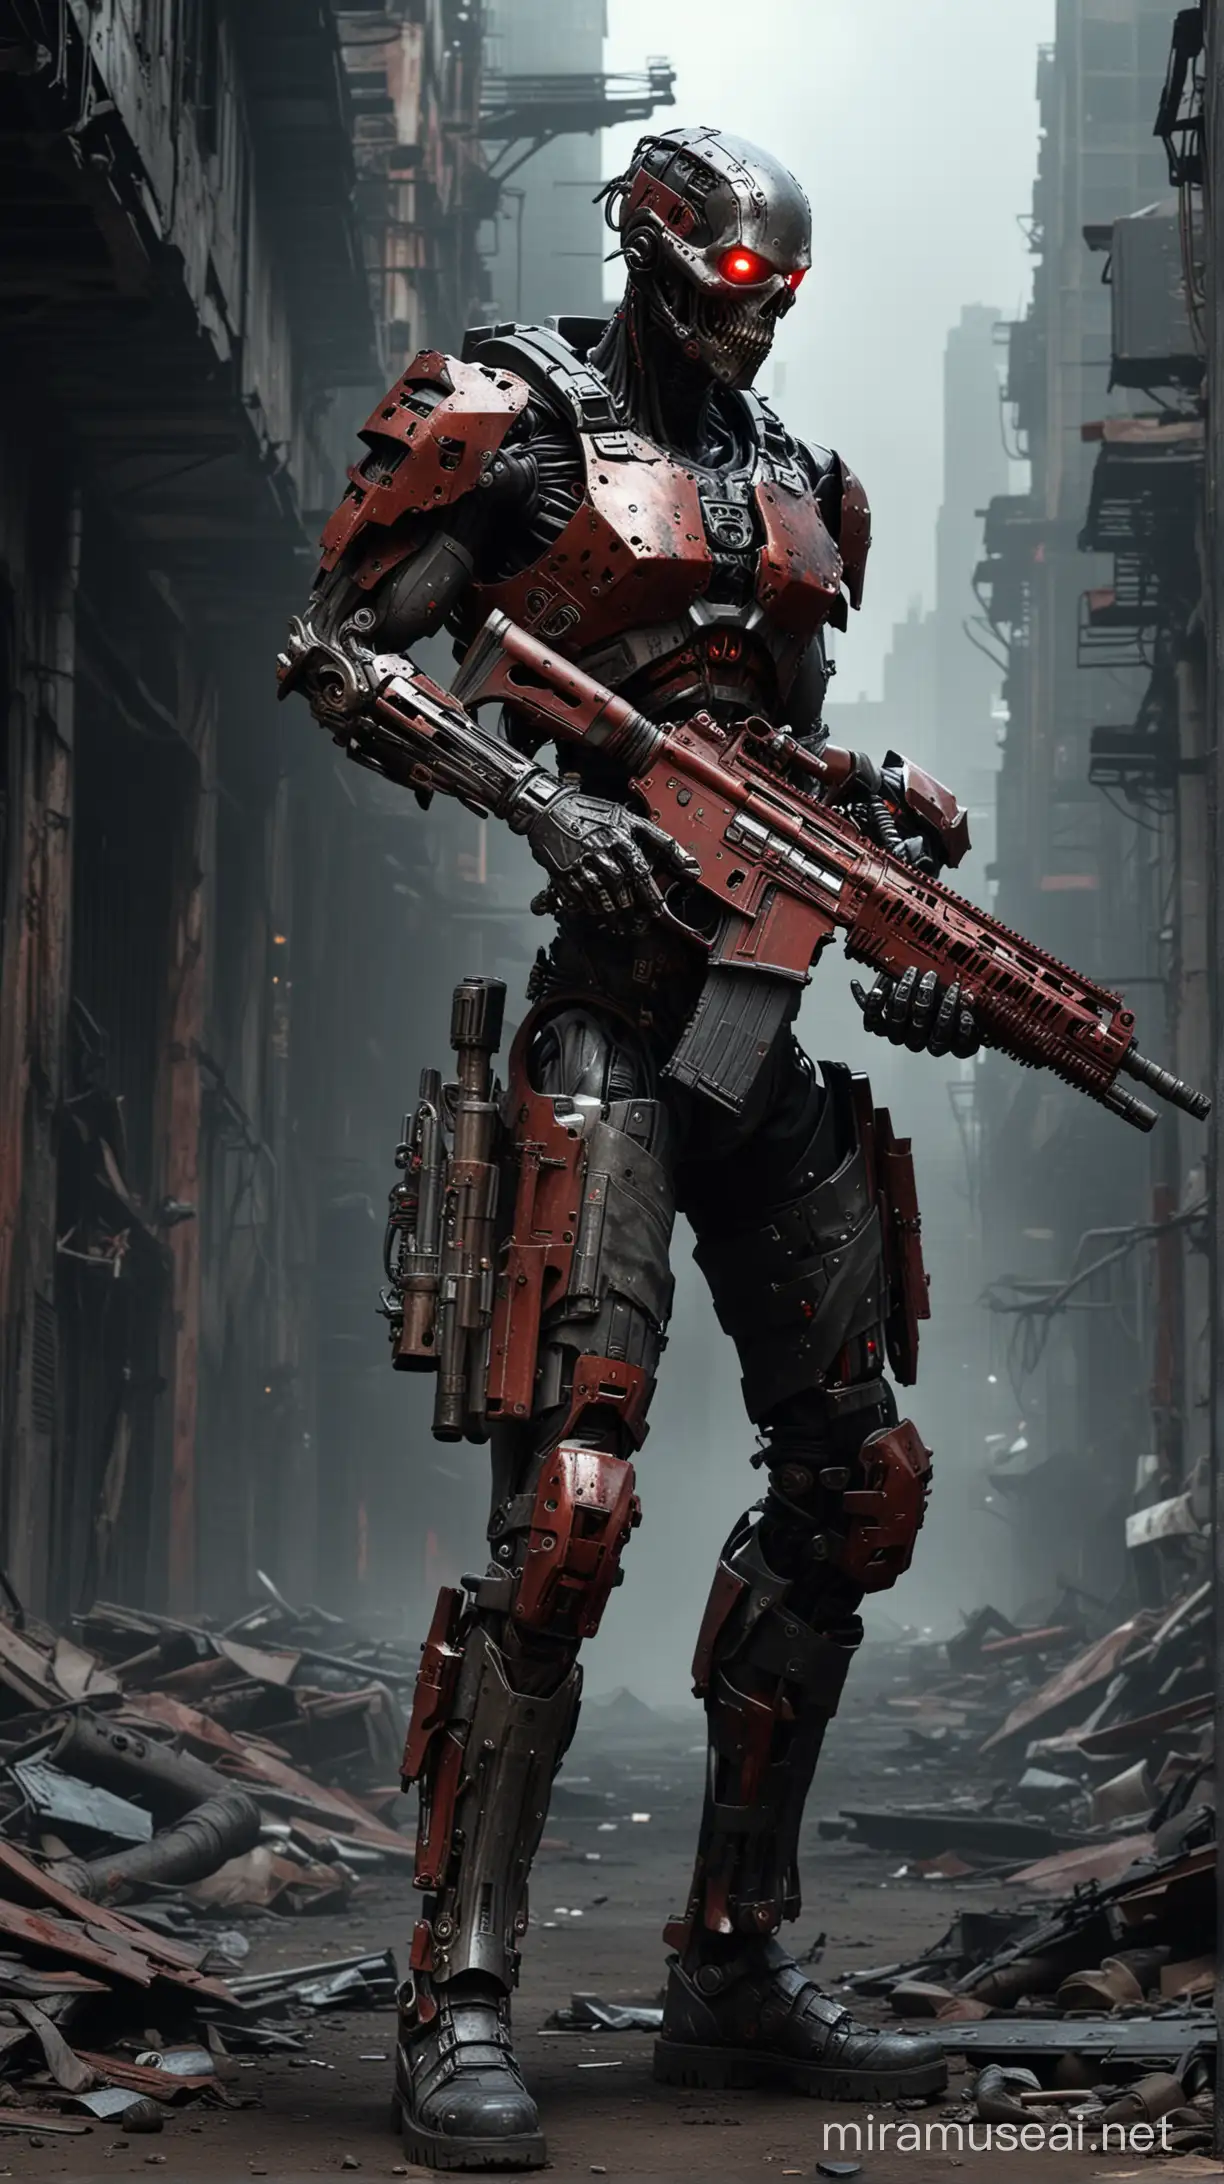 A cybernetically enhanced cyborg zombie with rusted and worn black and red armour holding an AR 15 assault rifle emerges from the shadows in a dark post-apocalyptic cityscape.